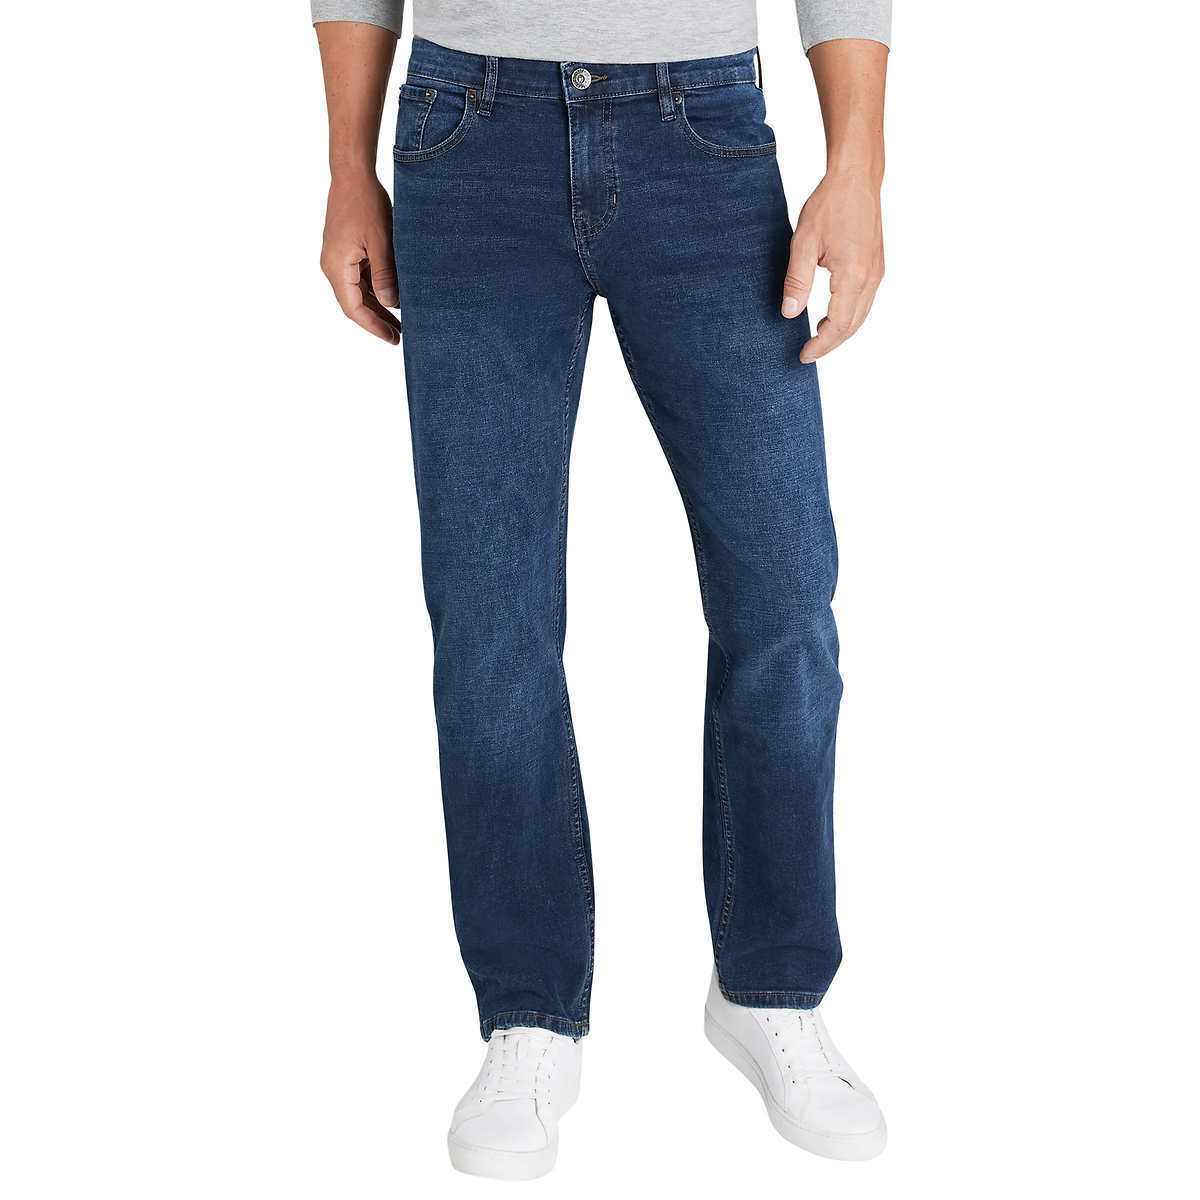 Chaps relaxed fit jeans, size 30